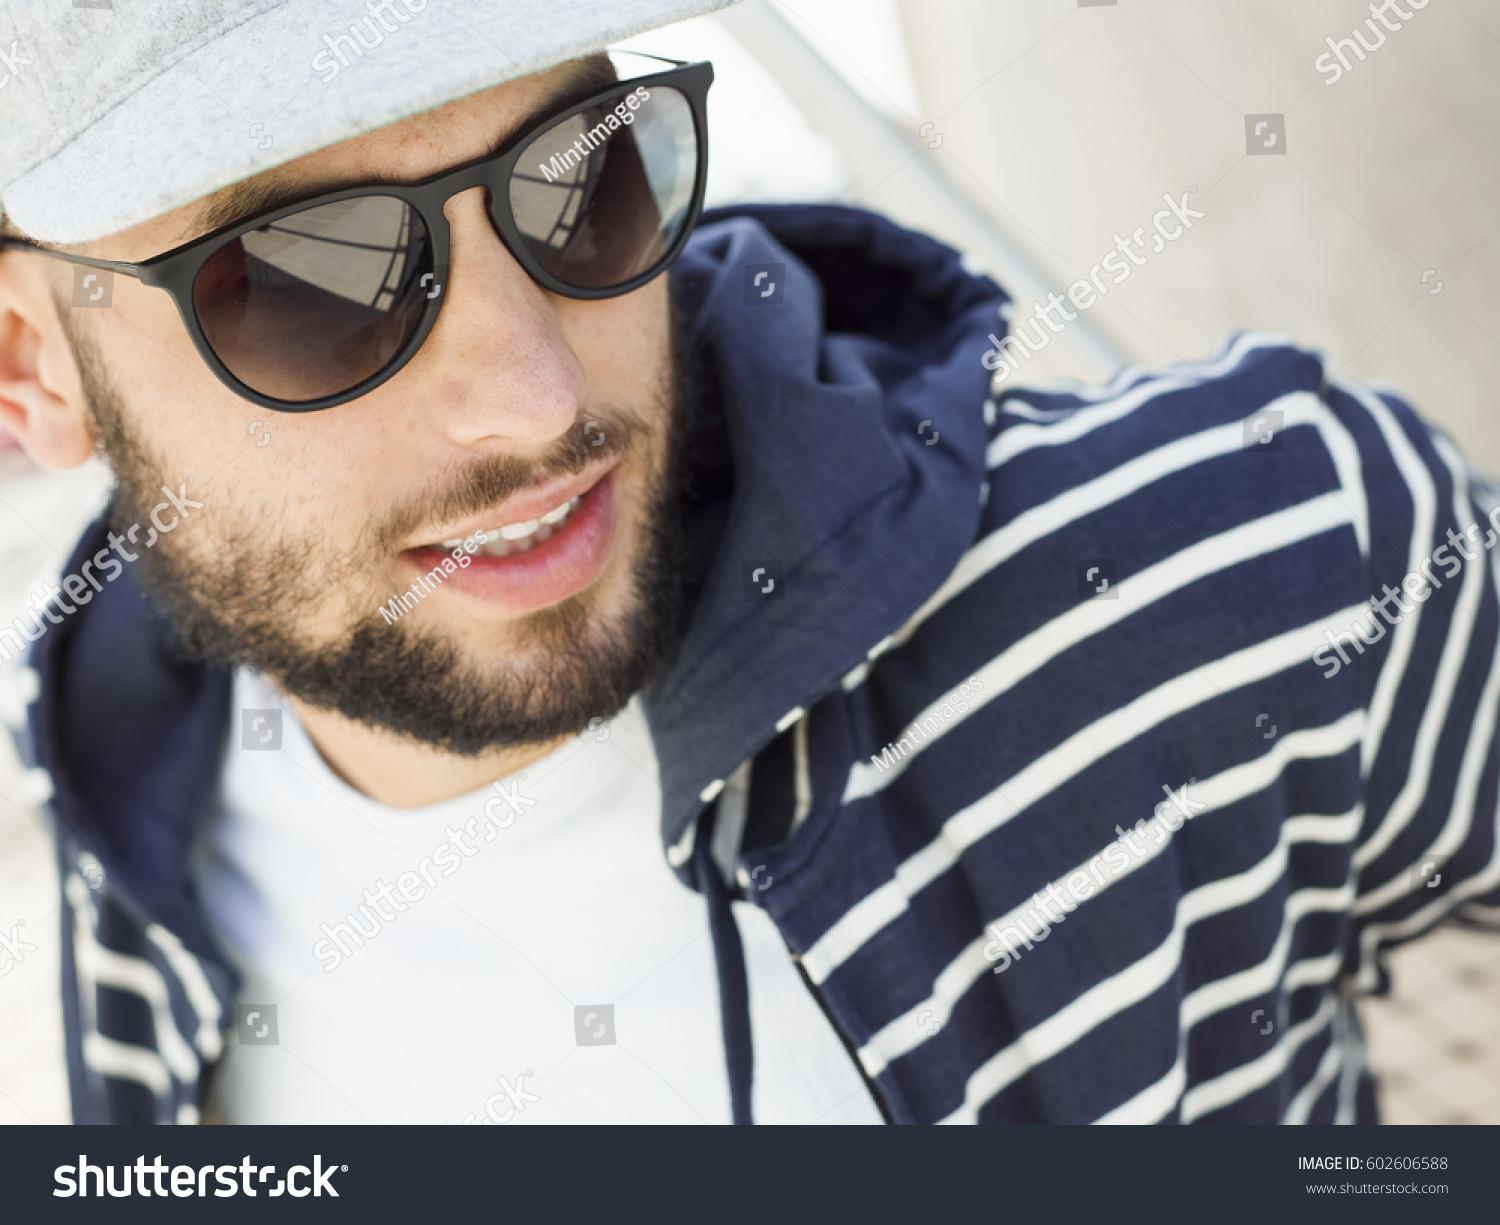 Portrait of a smiling young man wearing sunglasses #602606588